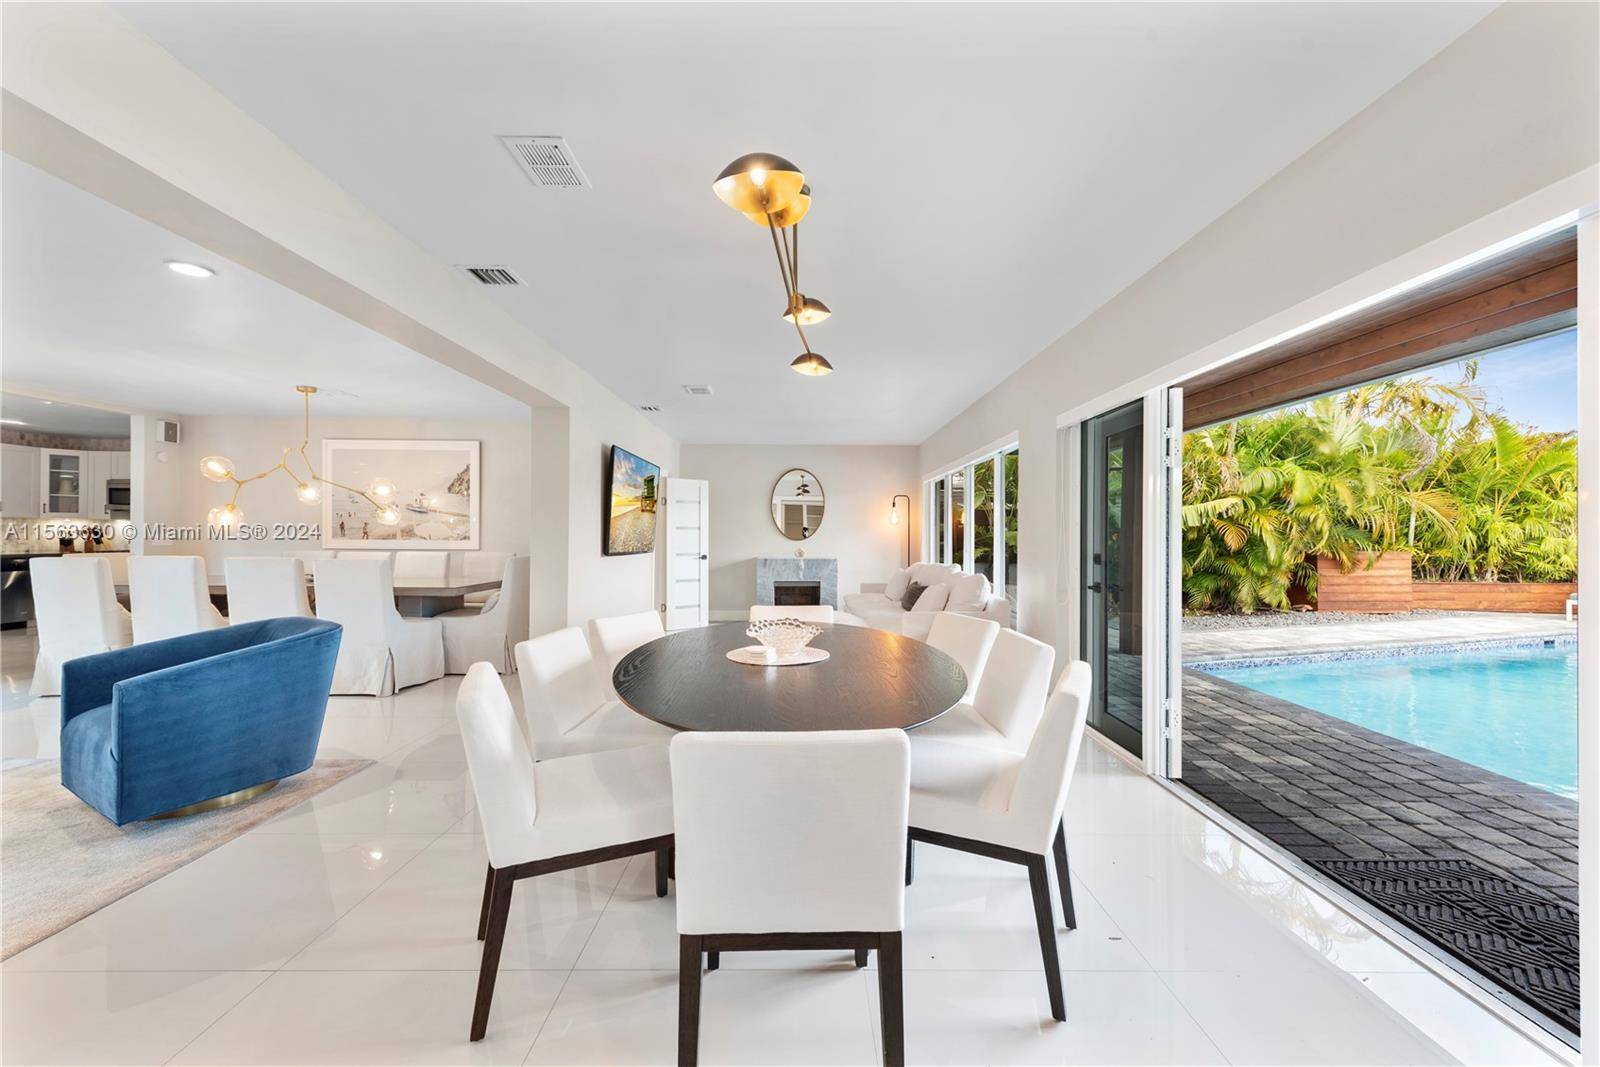 Located on a oversized lot in the prestigious gated Keystone Island this a beautifully renovated and fully furnished by Restoration Hardware turn key 3903 sqft home has s 75 feet ...